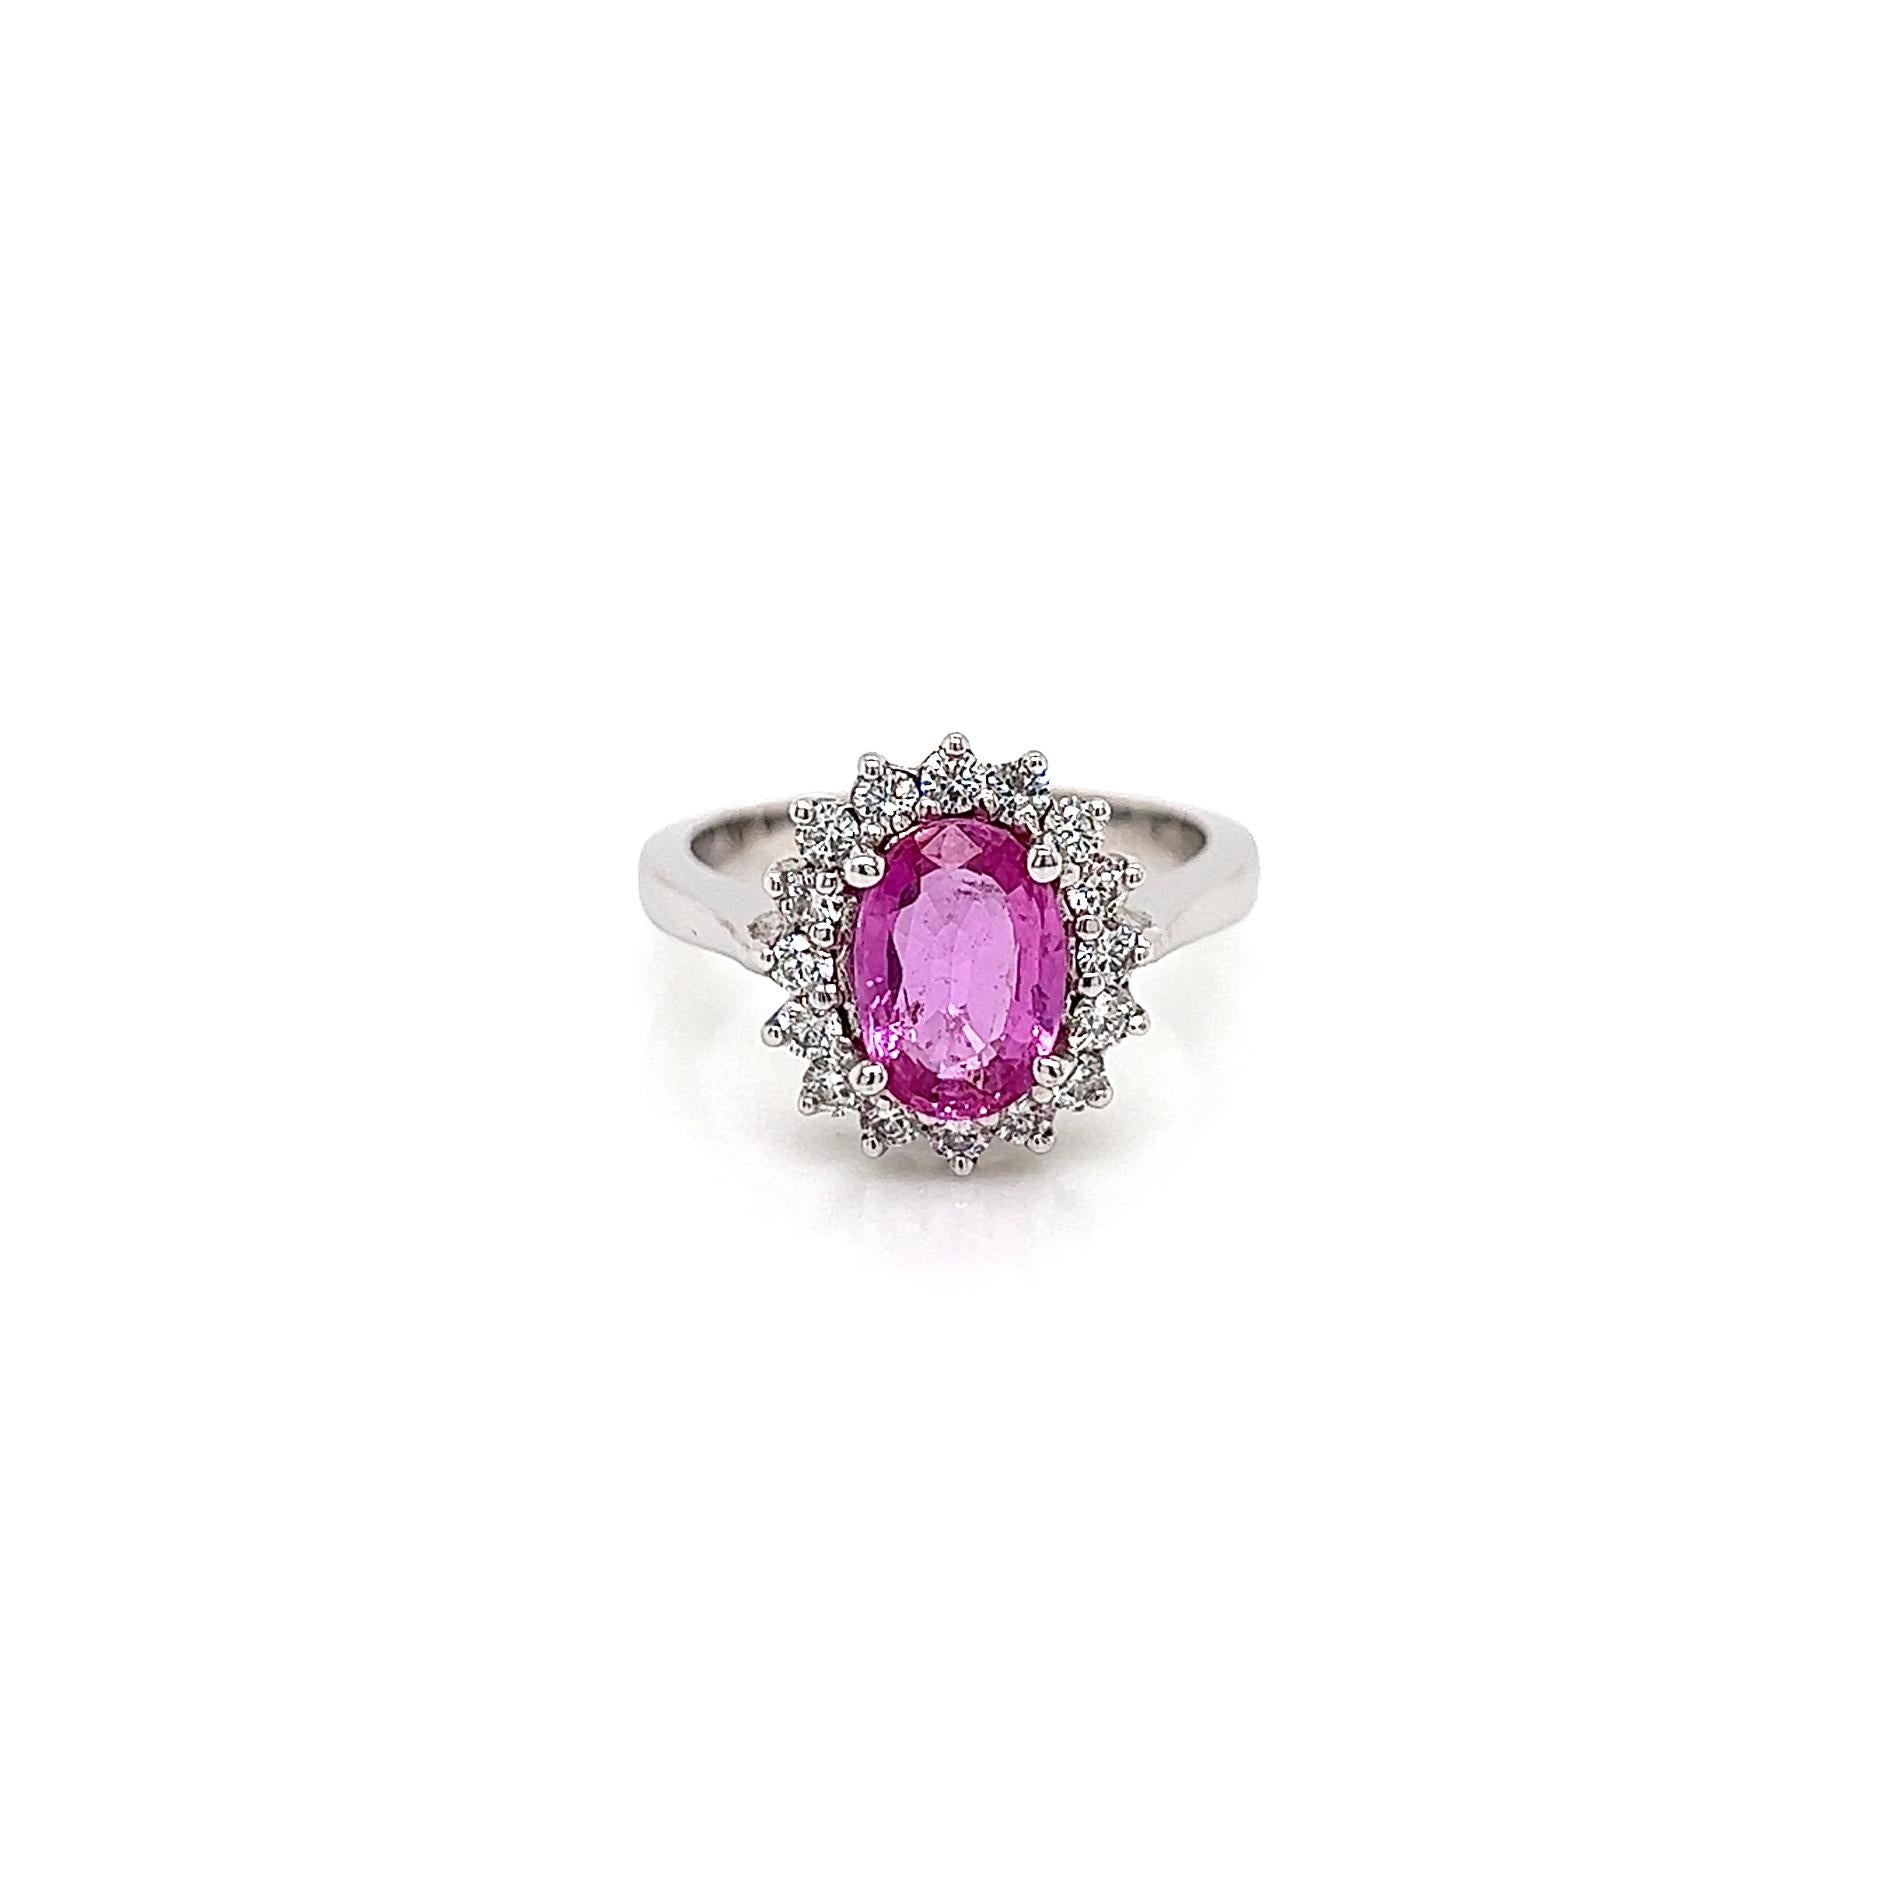 2.16 Total Carat Pink Sapphire Diamond Halo Ladies Ring

-Metal Type: 18K White Gold 
-1.73 Carat Oval Cut Pink Sapphire  
-0.43 Carat Round Side Natural Diamonds, F-G Color, VS-SI Clarity
-Size 6.5

Made in New York City.